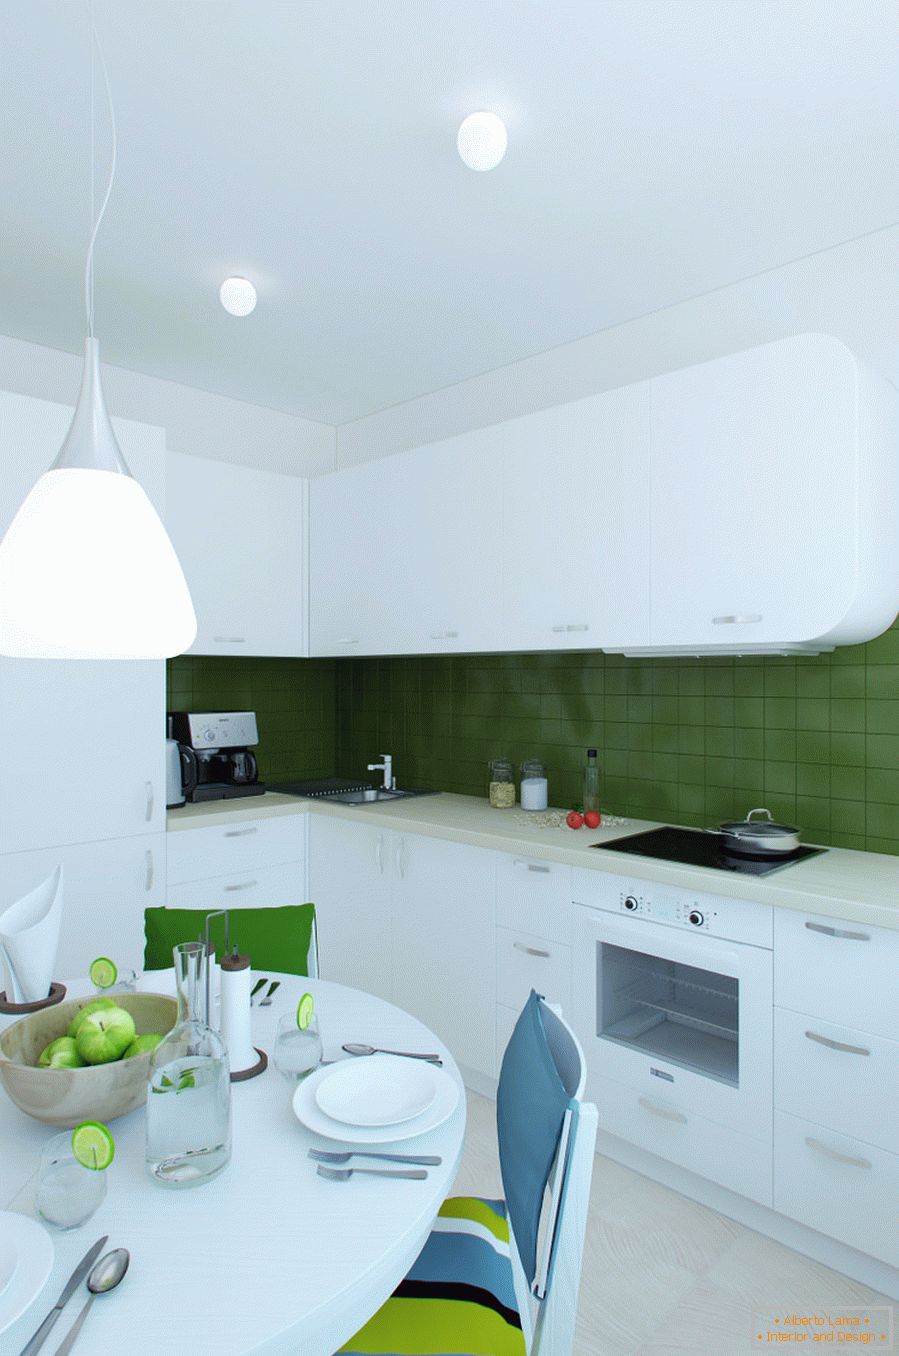 Kitchen interior design in white and green colors